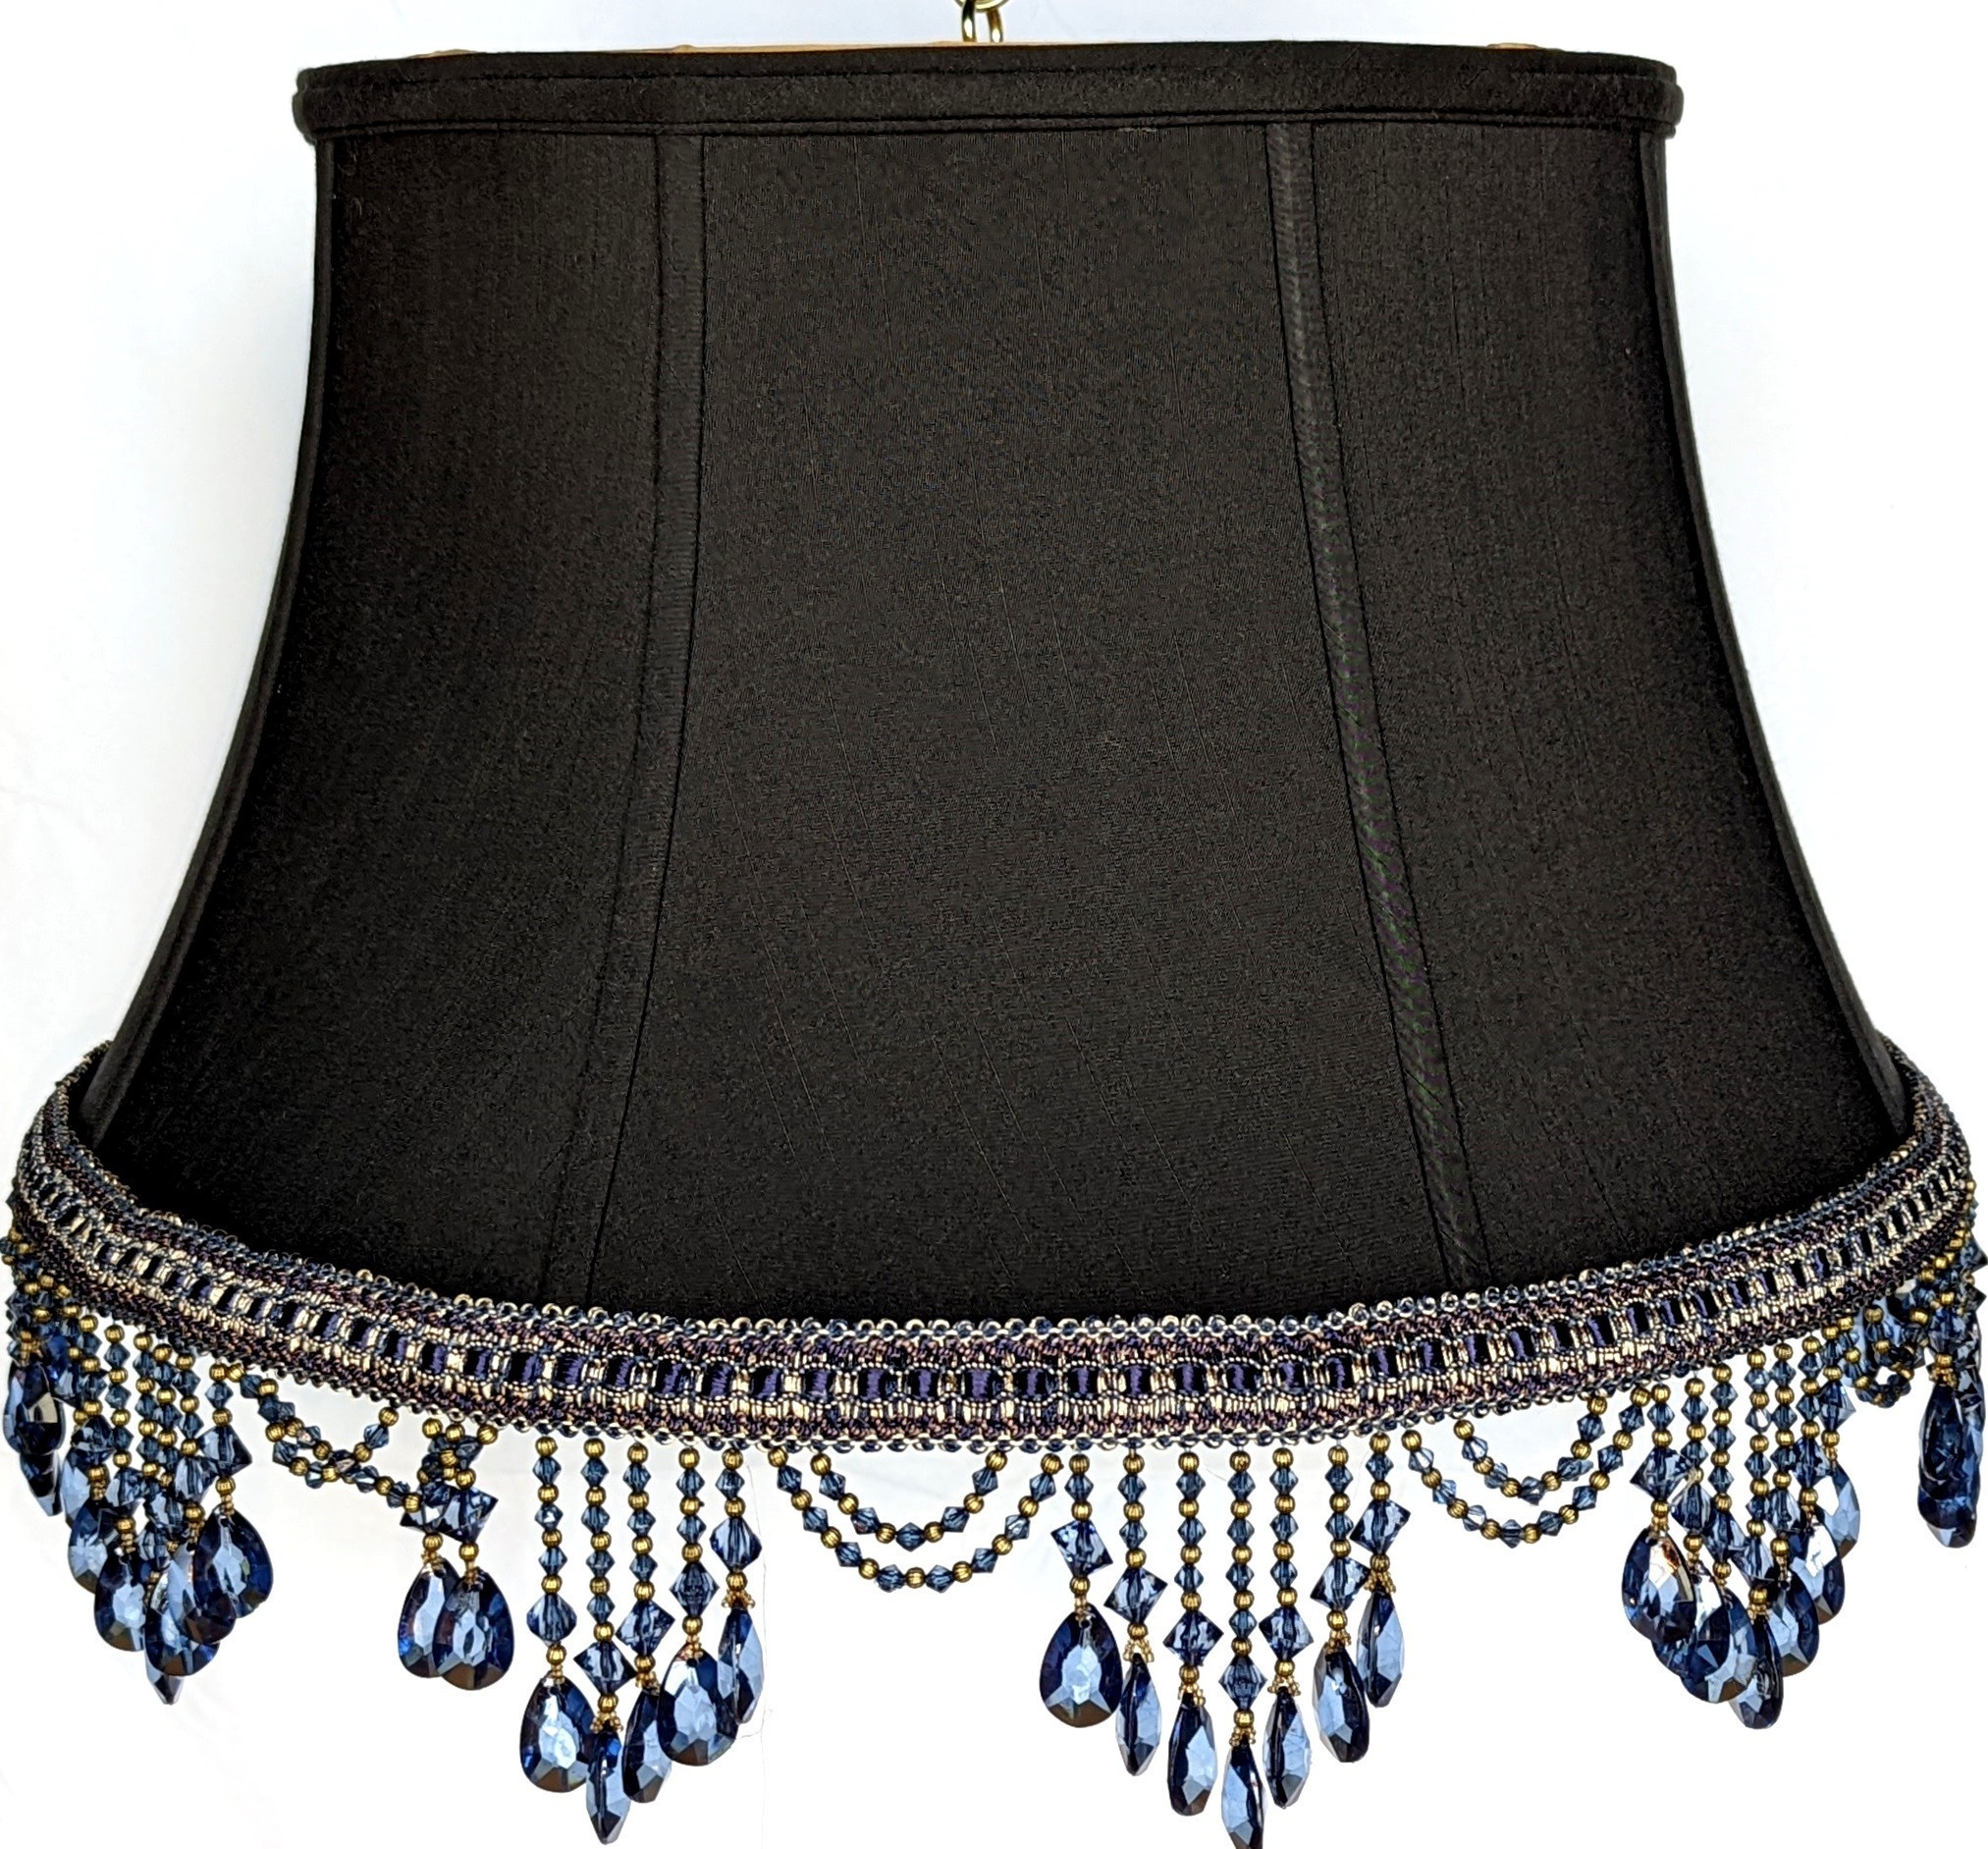 Black Silk 6 Way Floor Lamp Shade with Beaded Fringes 17-19"W